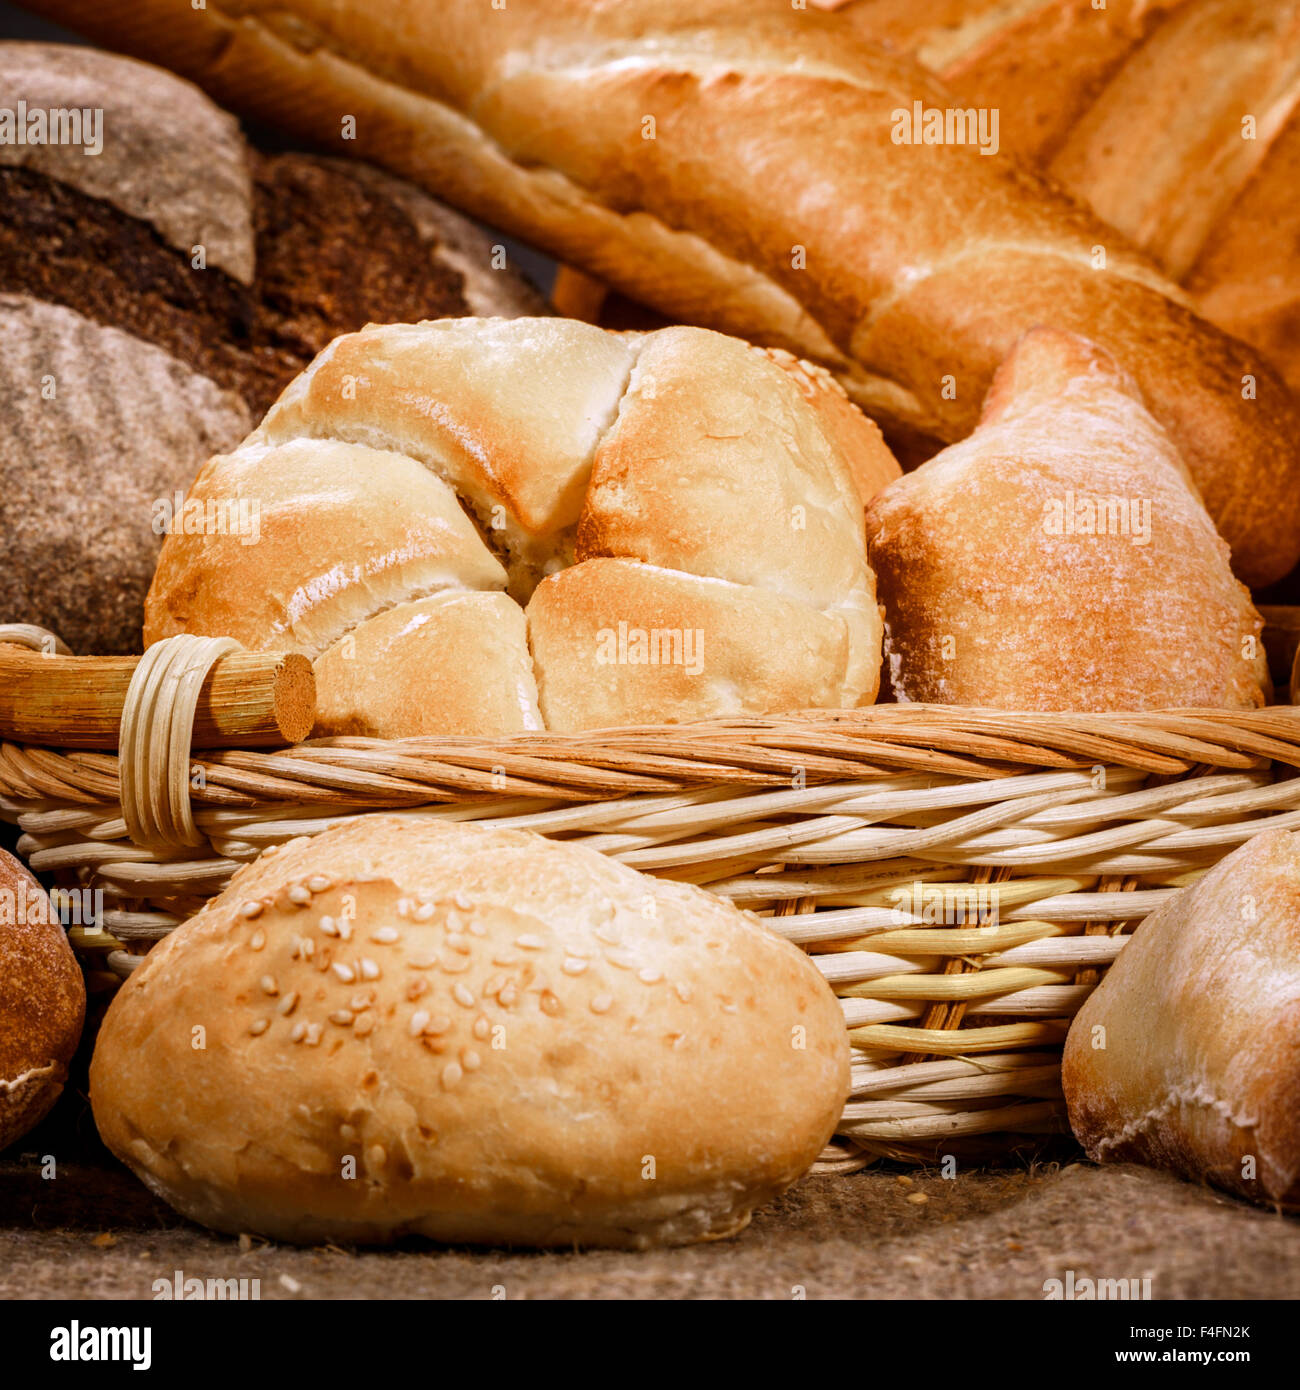 Breads and baked goods close-up Stock Photo